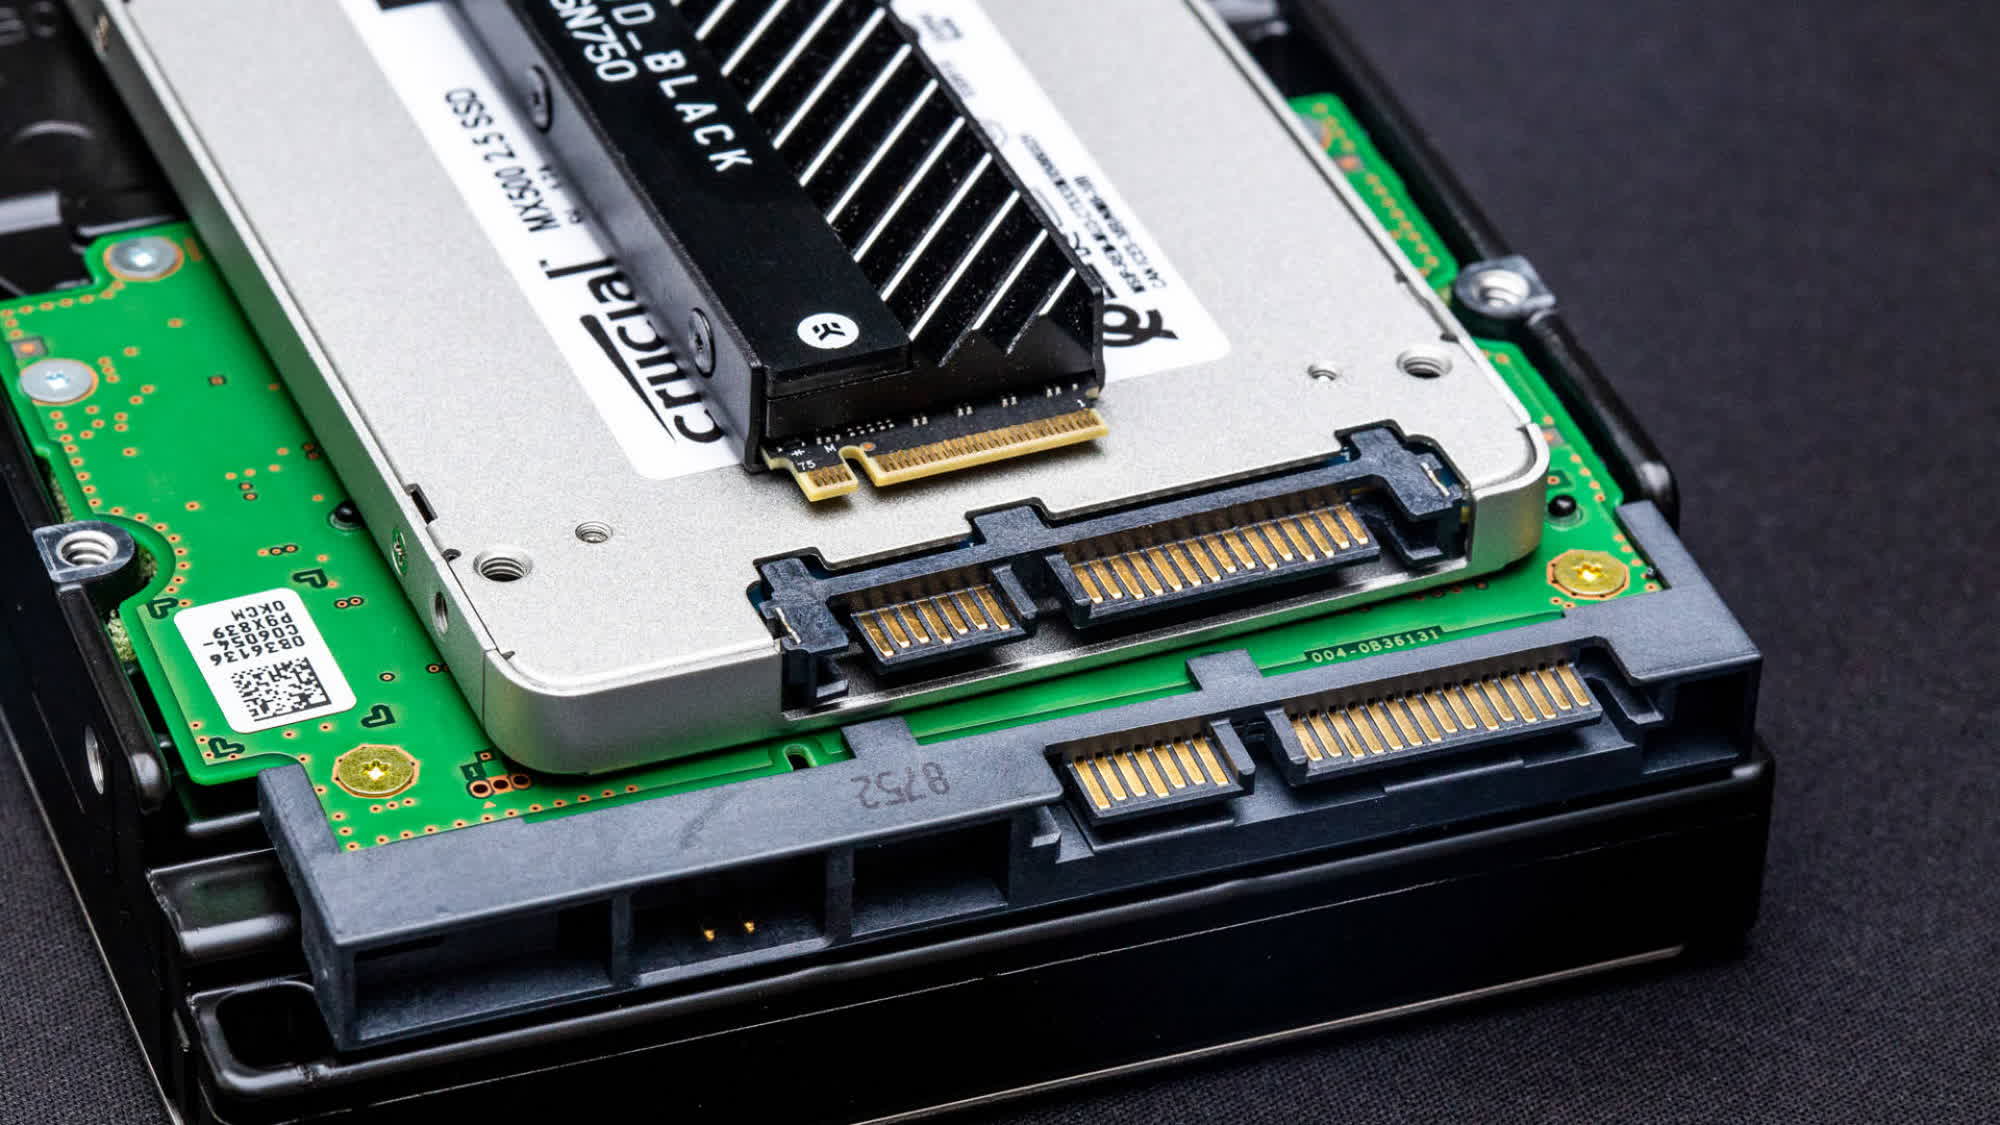 SSD reliability is only slightly better than HDD, Backblaze says